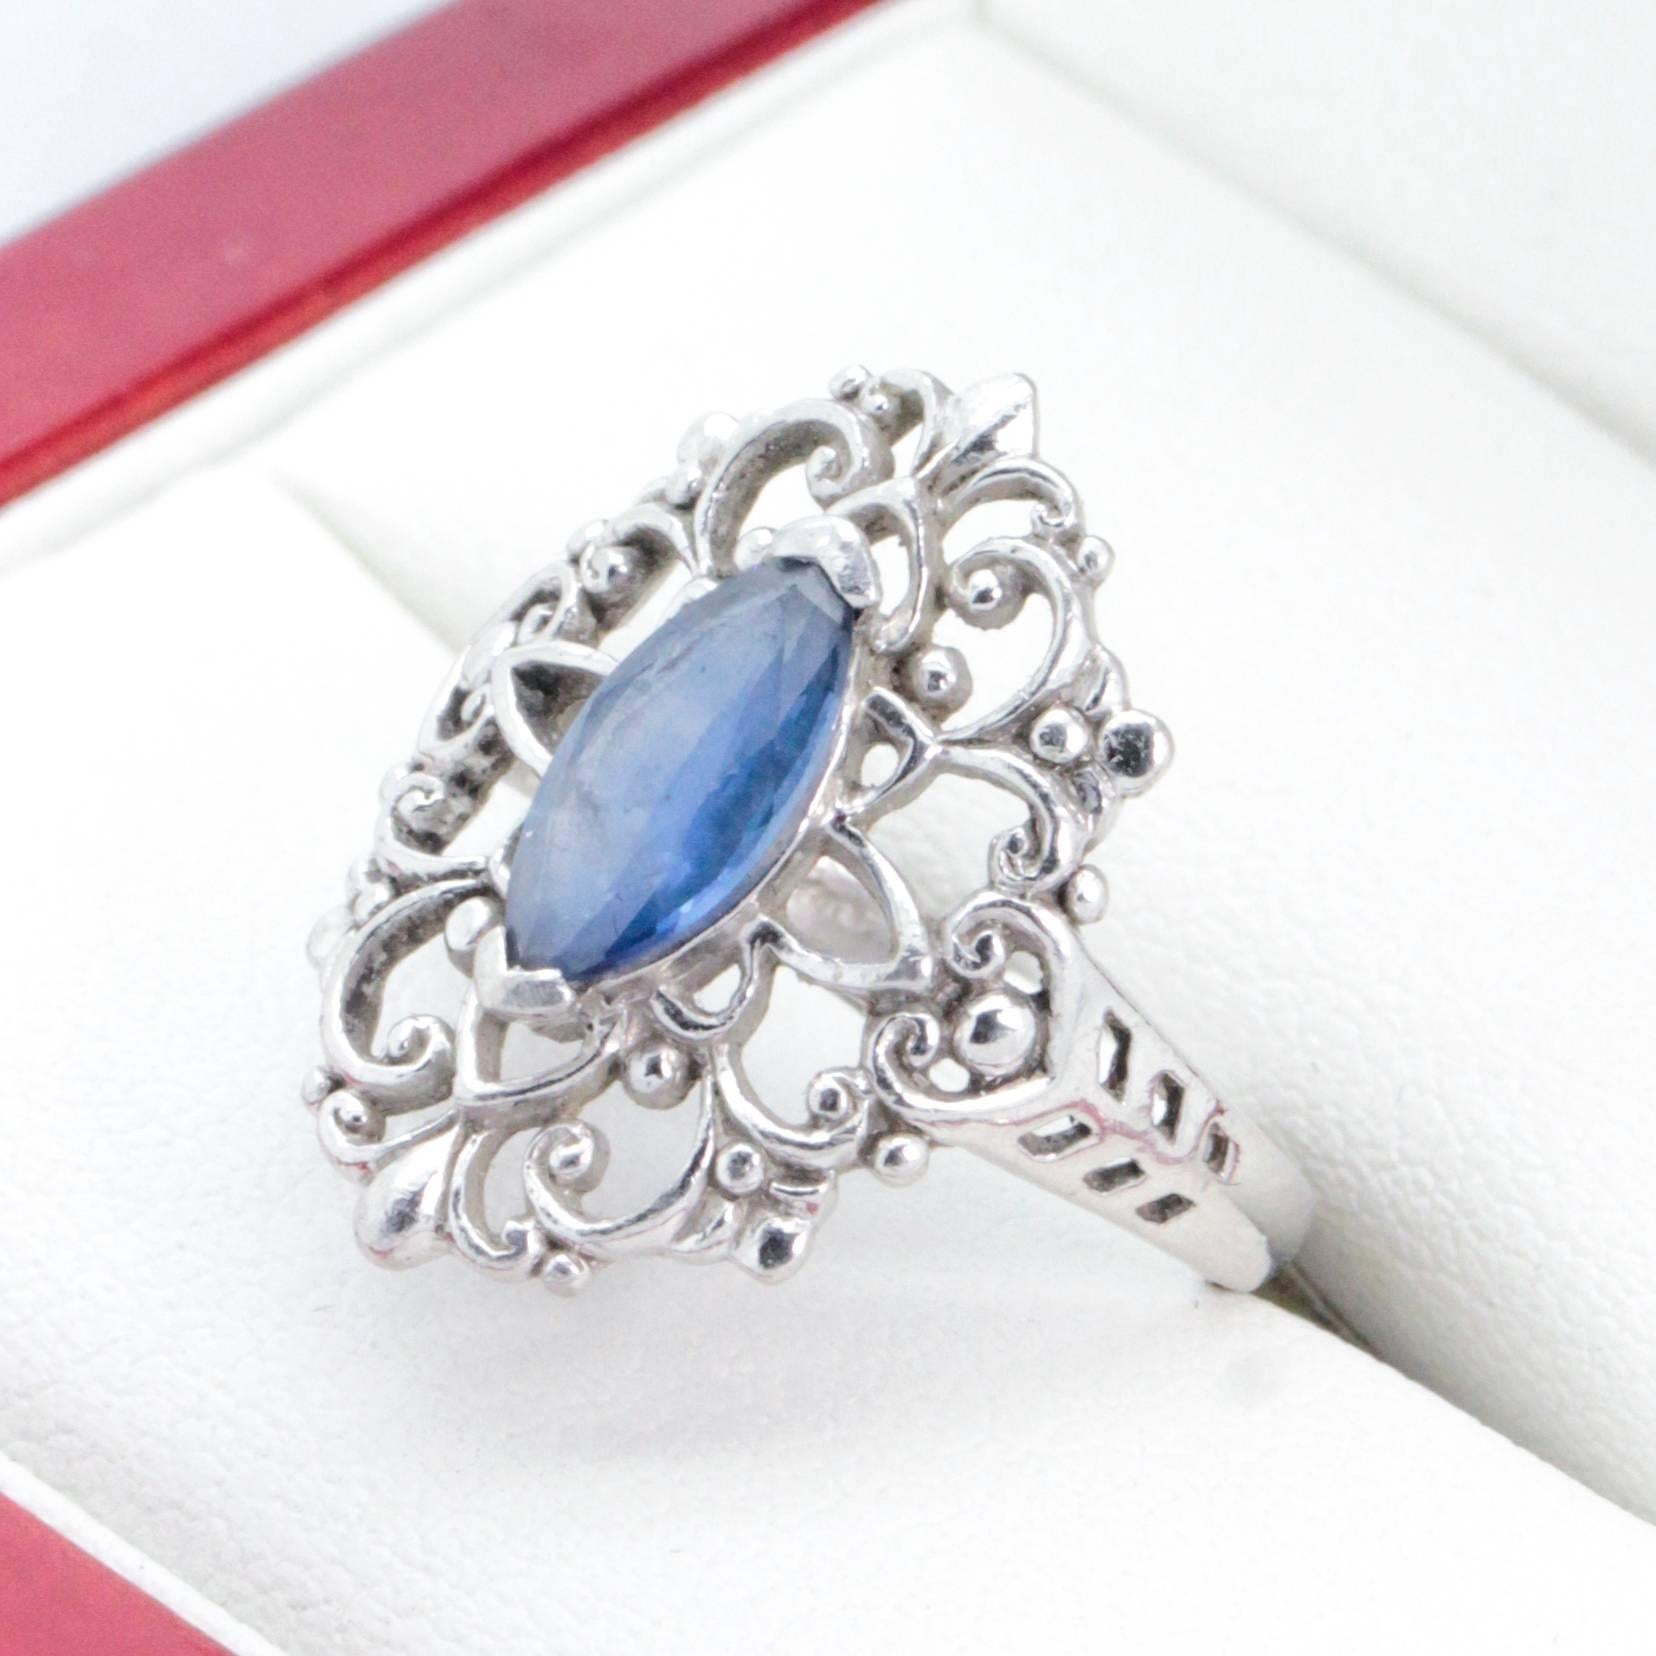 Very nice Platinum Filigree ring with Marquise Sapphire. All natural Platinum Sapphire filigree ring featuring a marquise-cut sapphire, end set, surrounded by a filigree design. 4.20 - 1.95mm wide half round shank, stamped 10% pall, plat. The ring